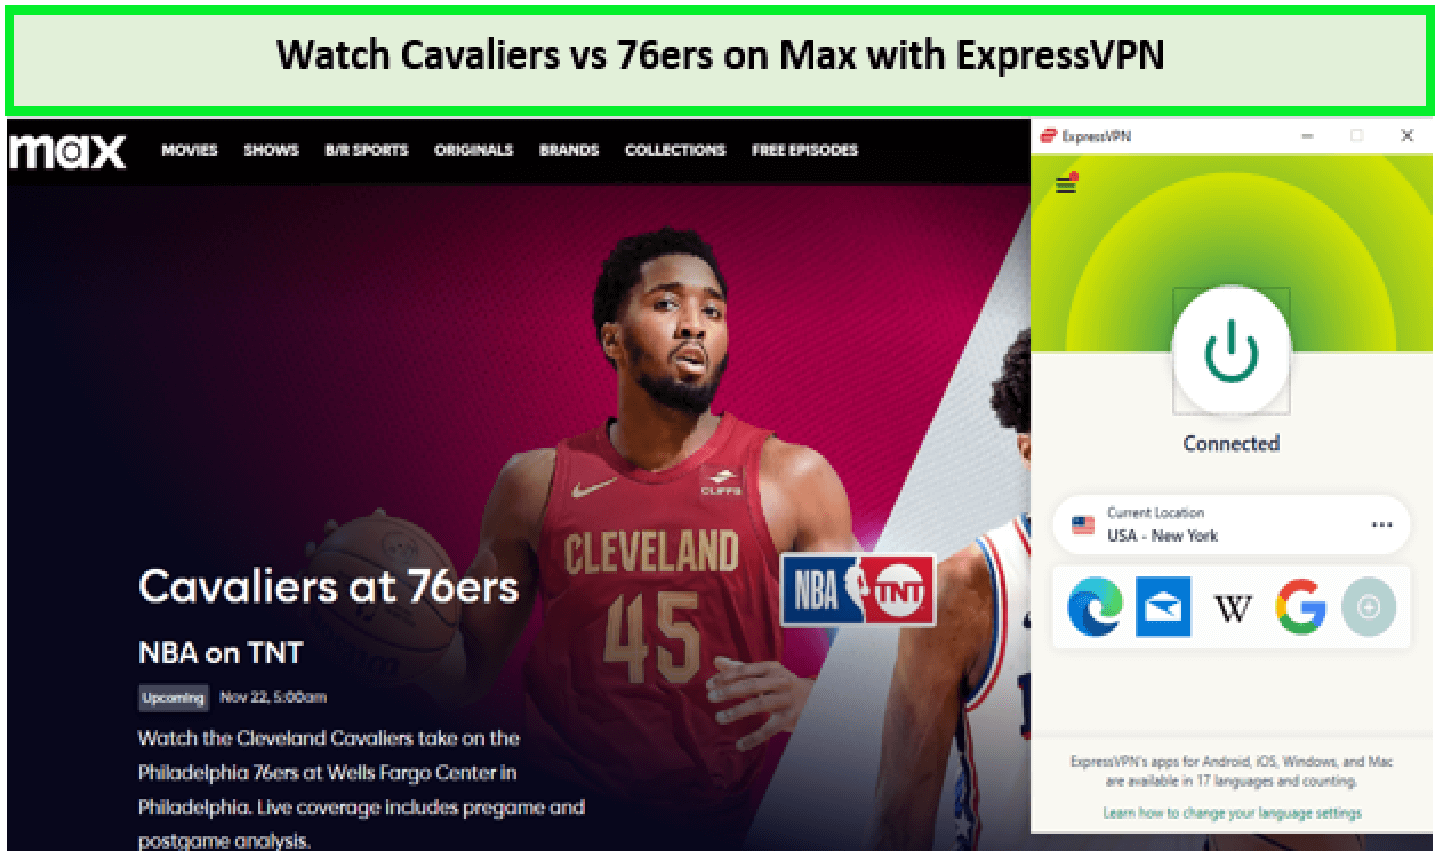 Watch-Cavaliers-vs-76ers-in-Italy-on-Max-with-ExpressVPN